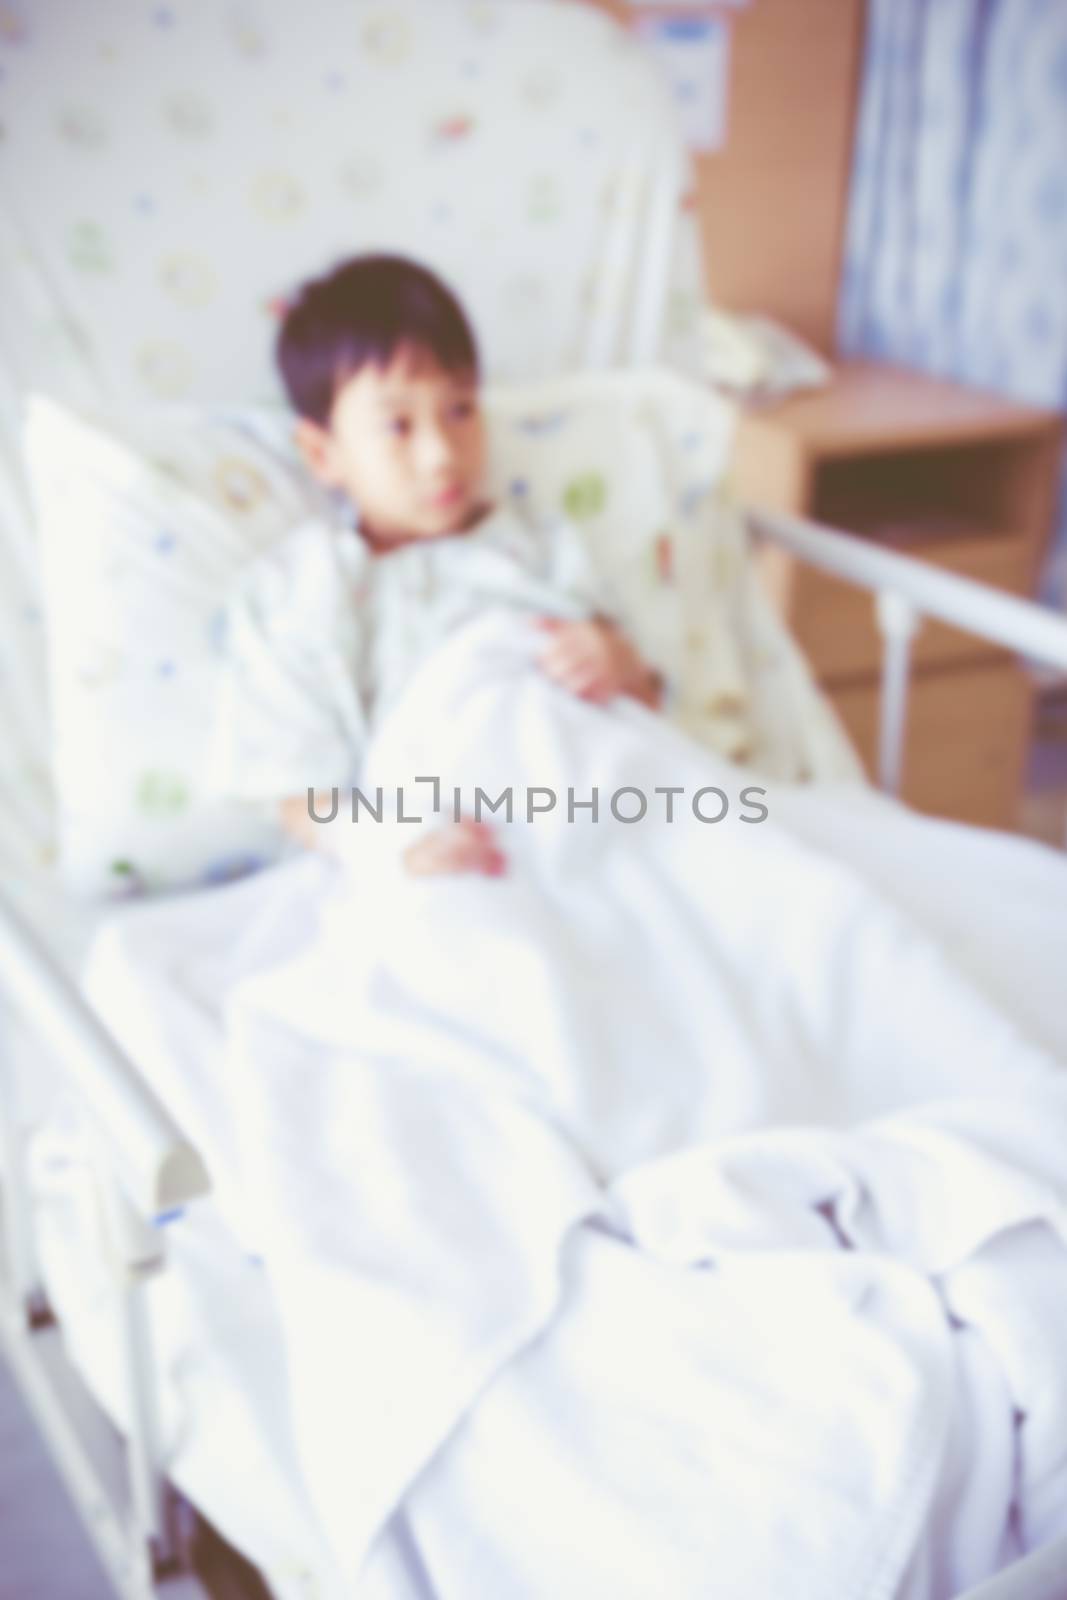 Abstract blurred background of child admitted at hospital room.  by kdshutterman